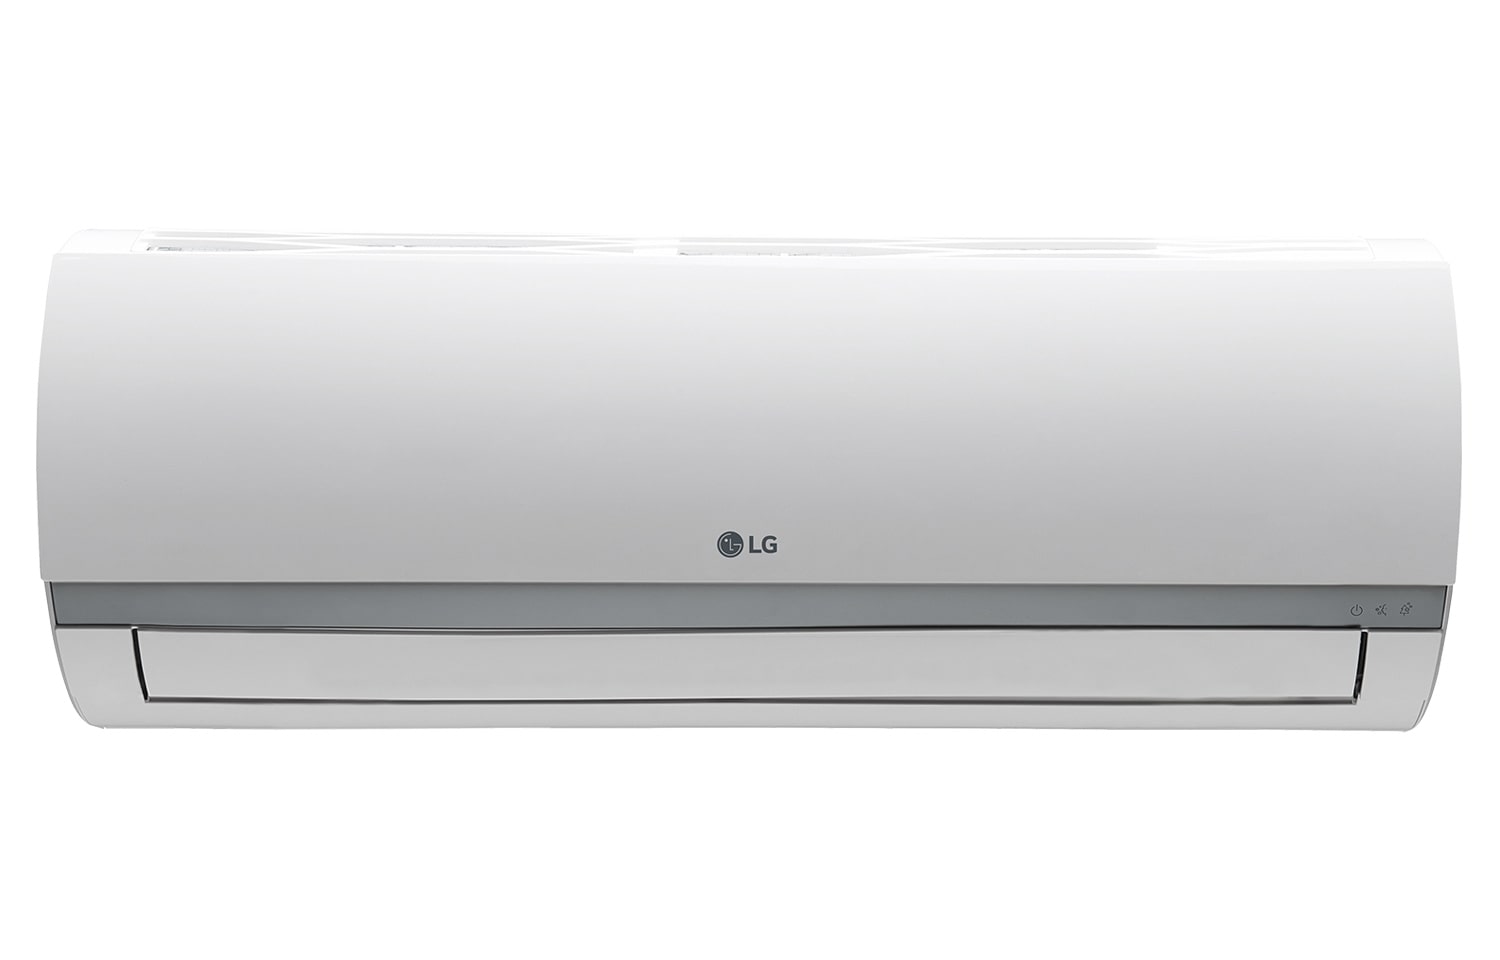 LG Deluxe Non-Inverter Air Conditioner – 2.5HP, BS-C246CYA0